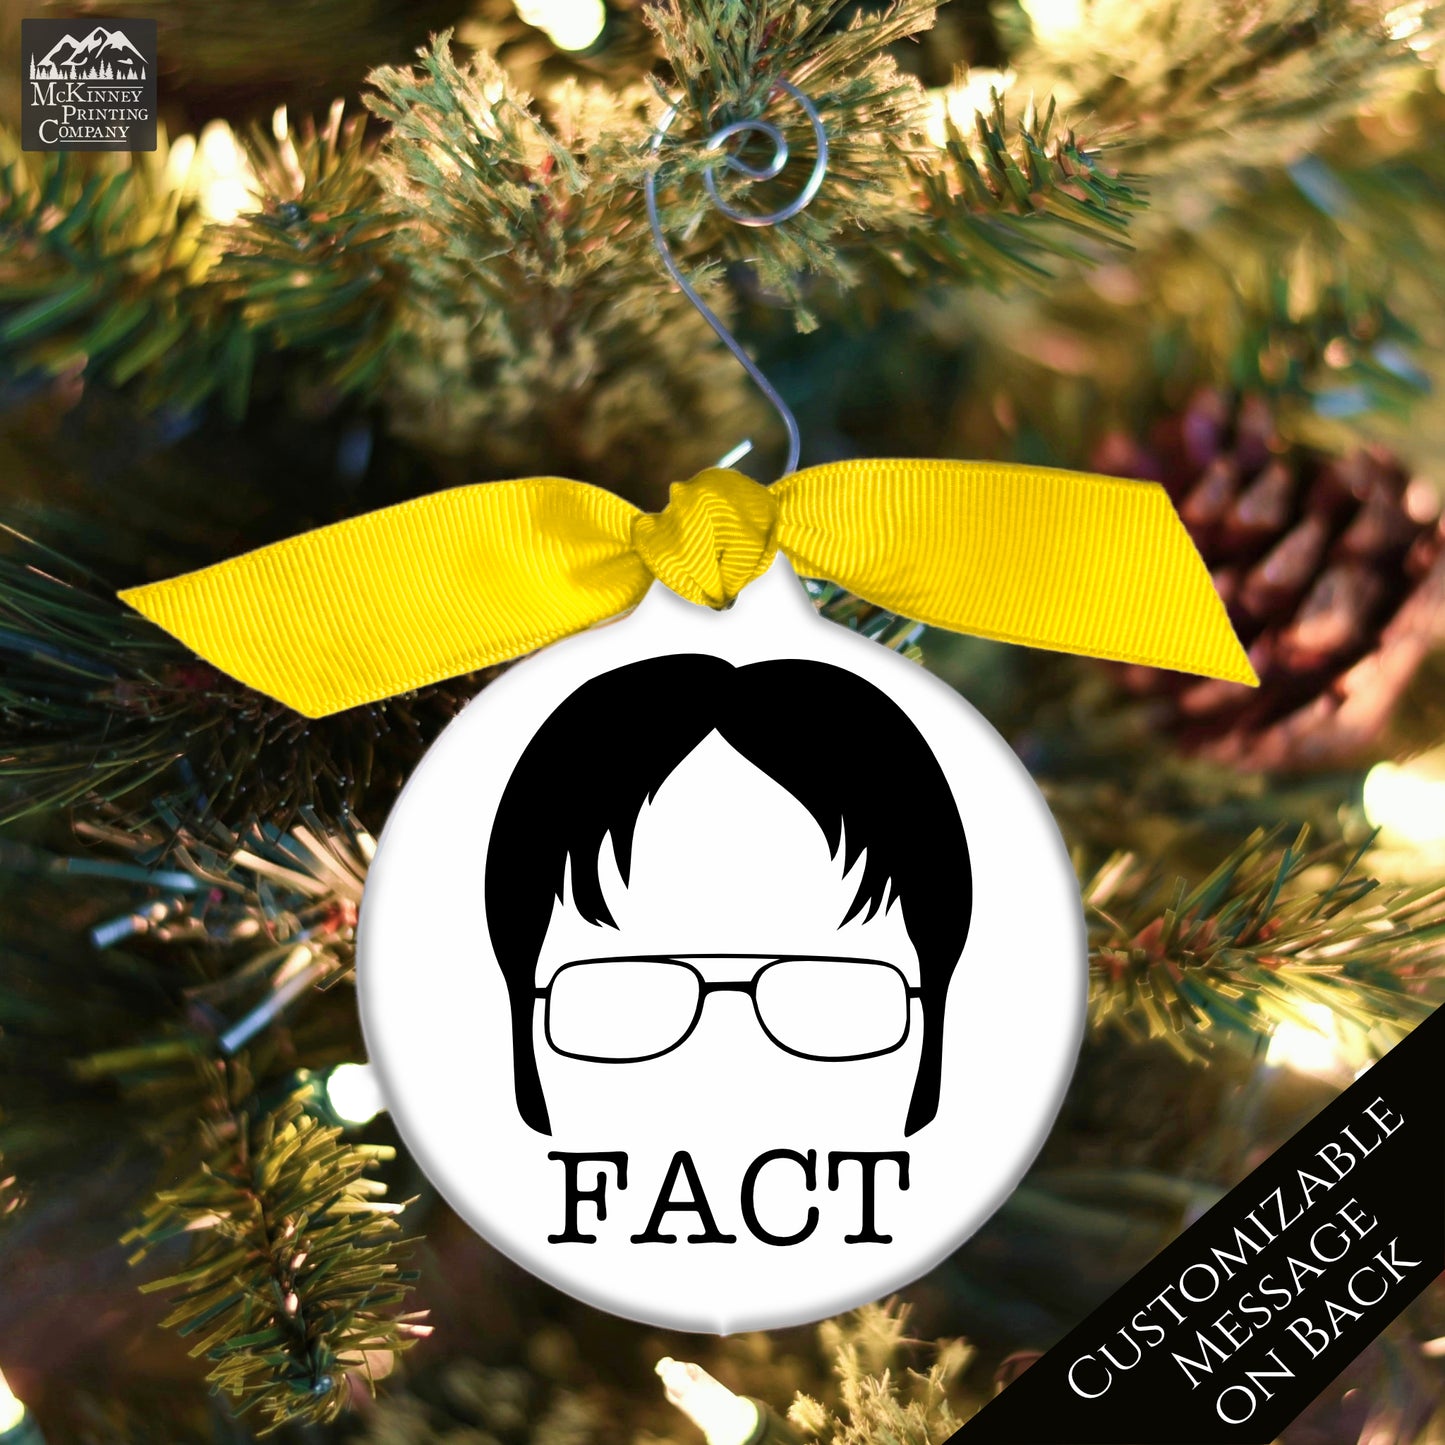 The Office TV Show - Christmas Ornament, Dwight Schrute, Fact, Quote